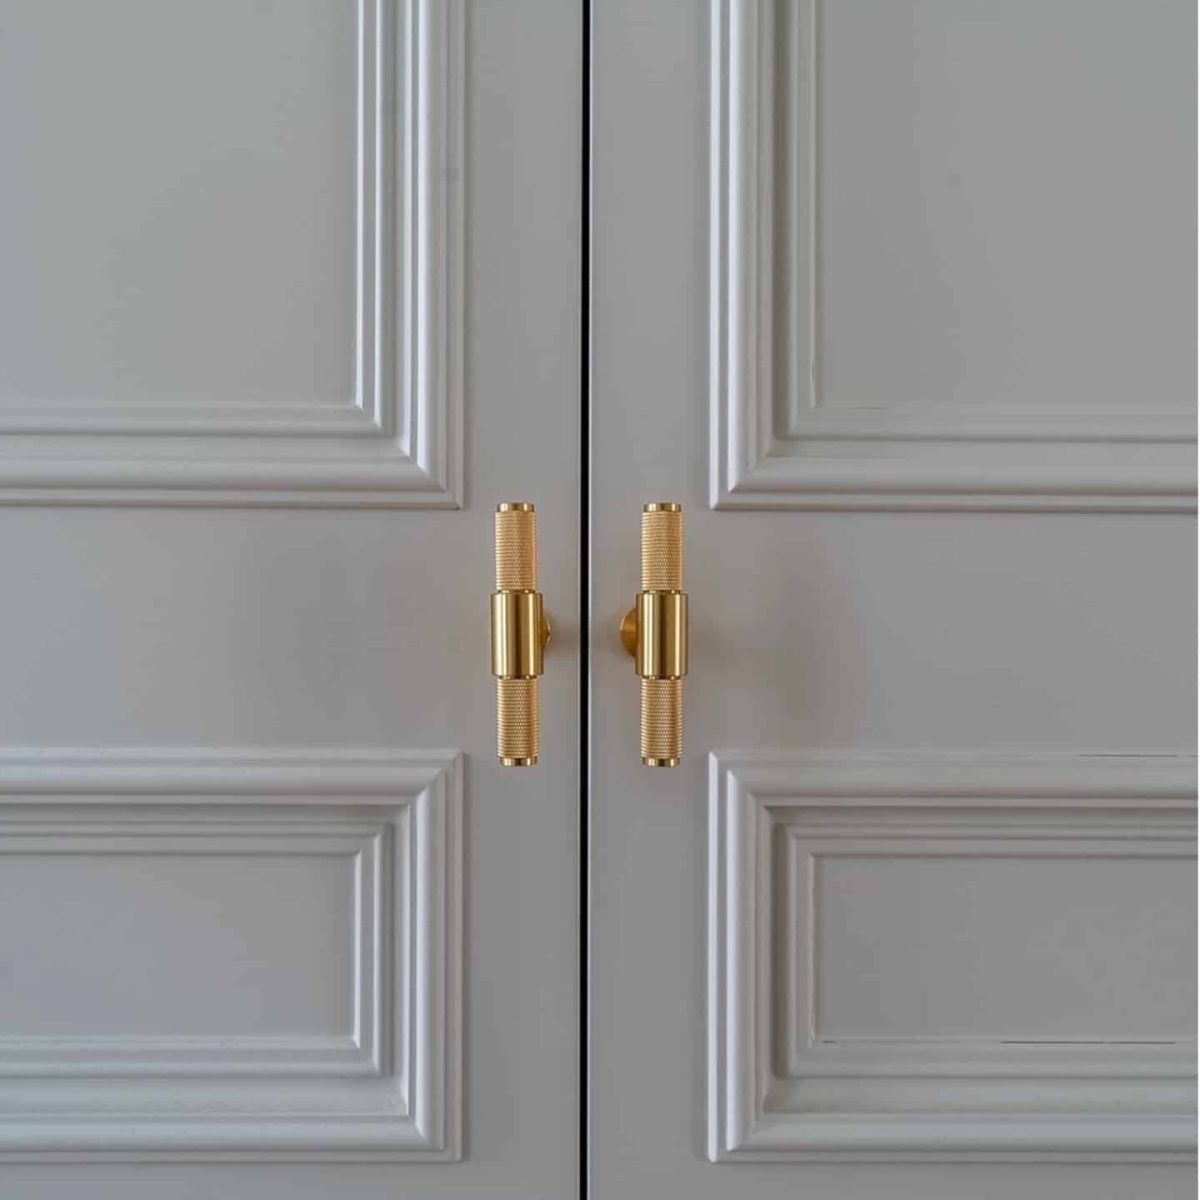 Mr Wardrobe's bespoke white doors with gold handles, handcrafted in London.